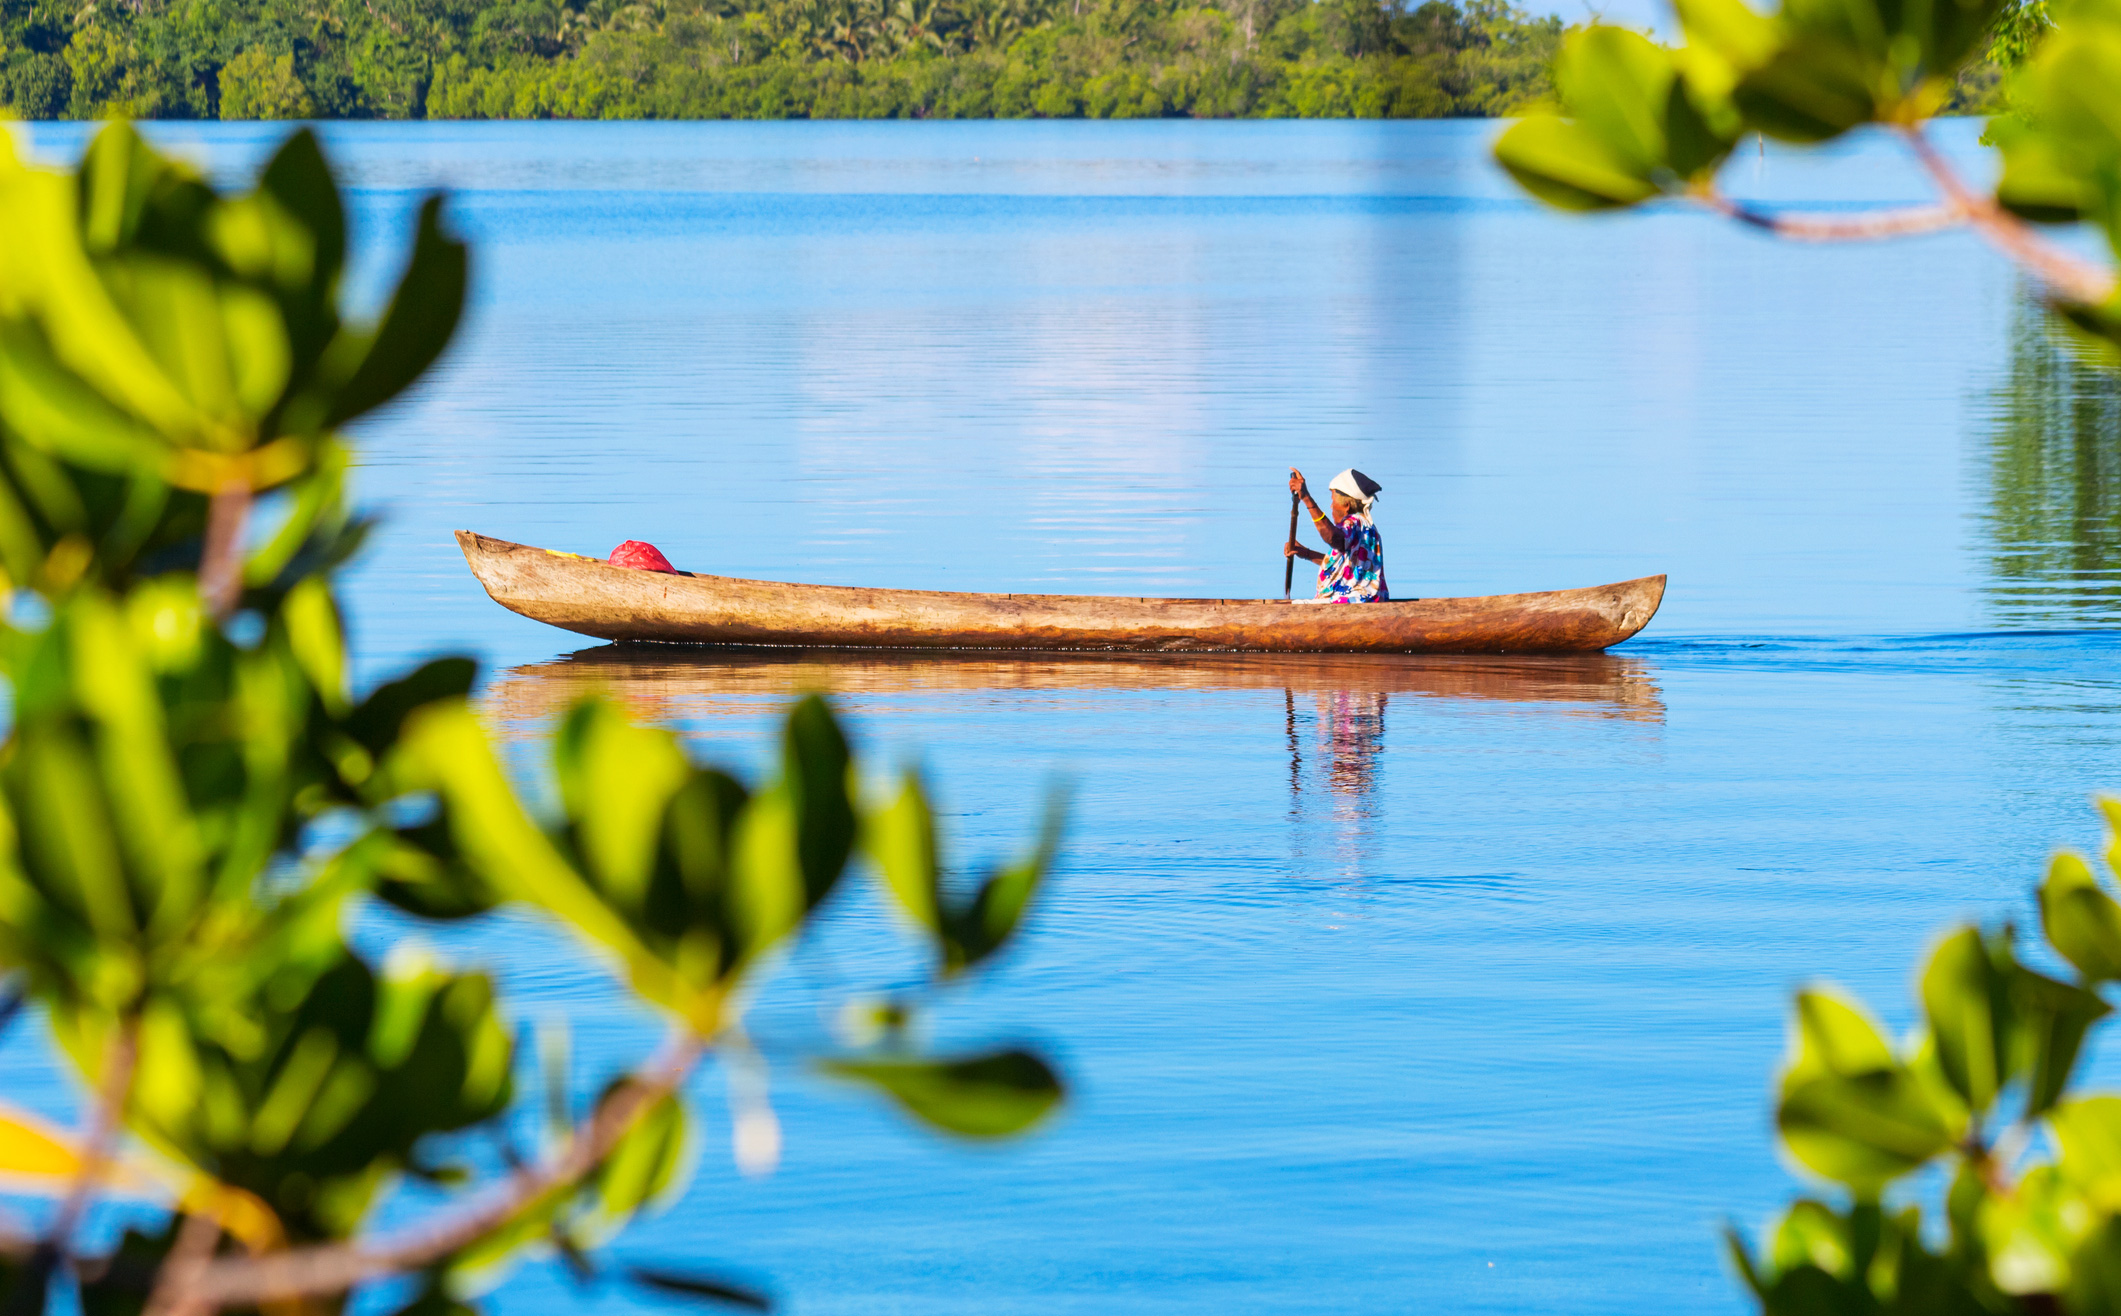 Travel Vaccines and Advice for the Solomon Islands